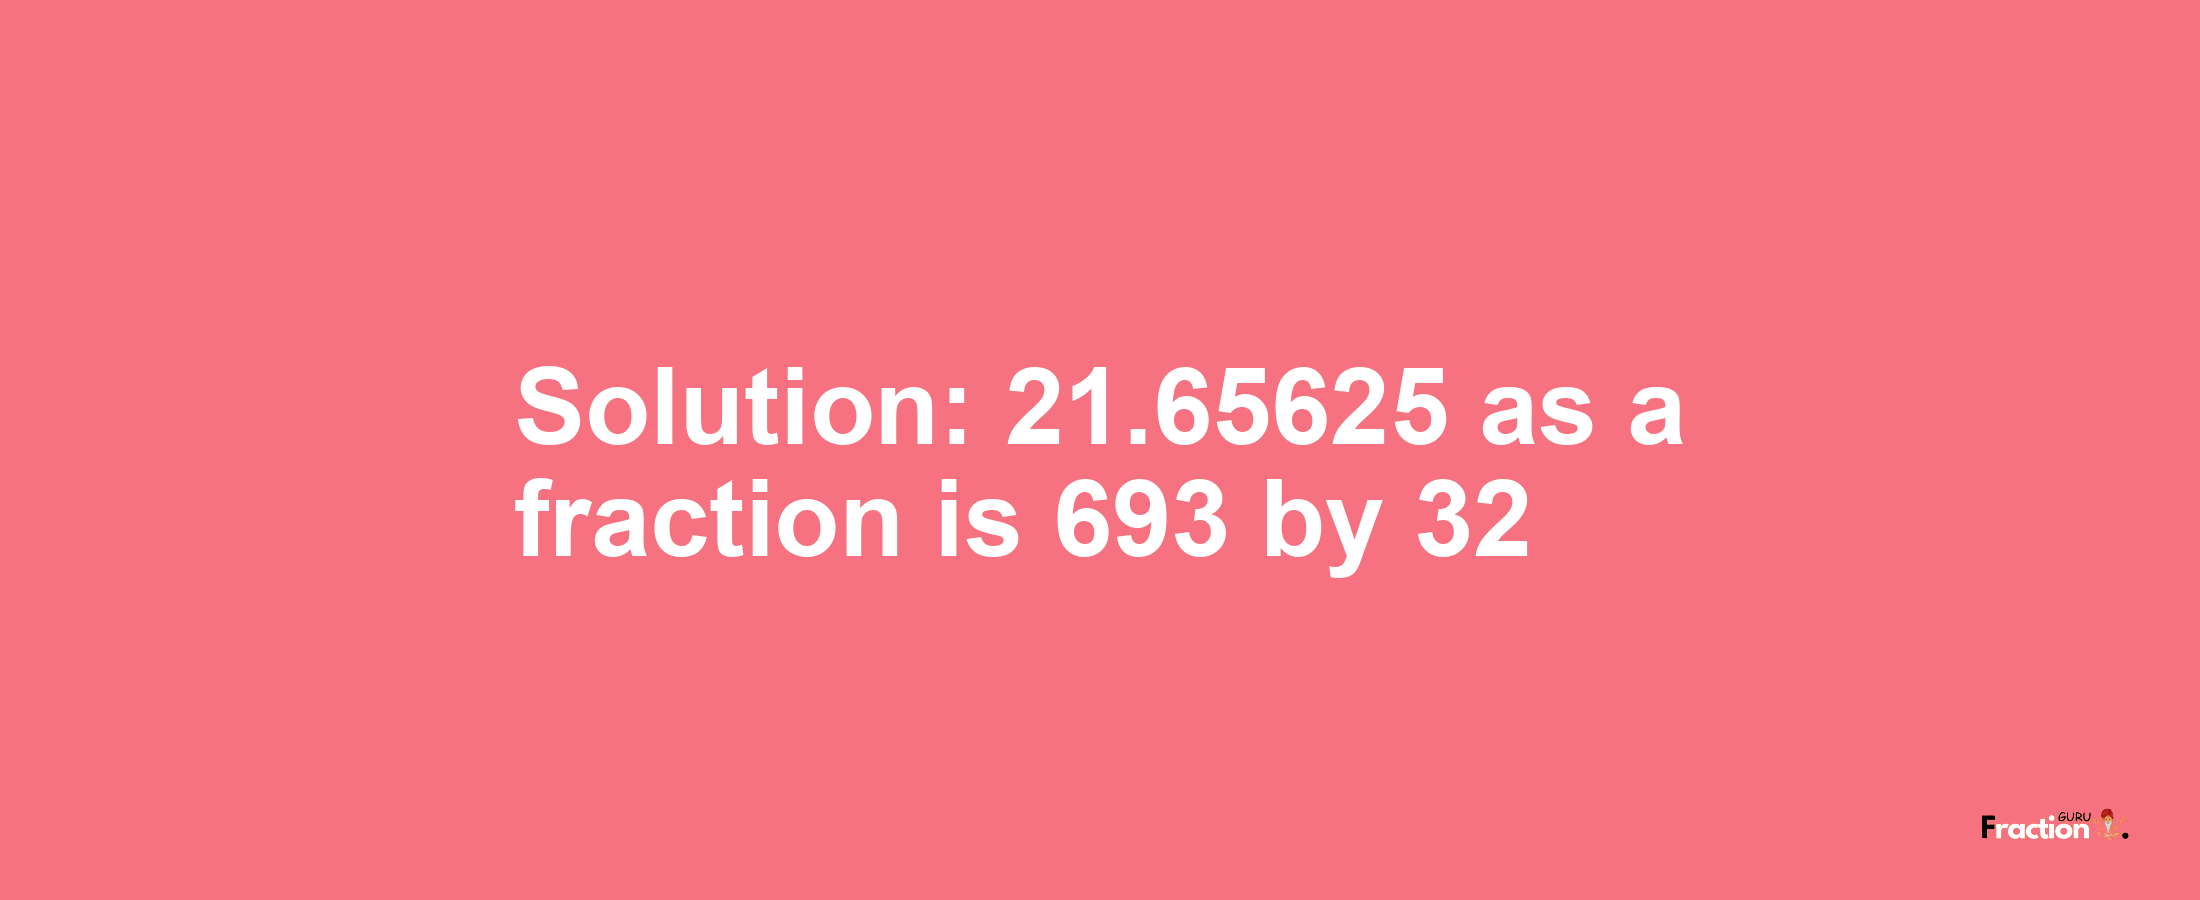 Solution:21.65625 as a fraction is 693/32